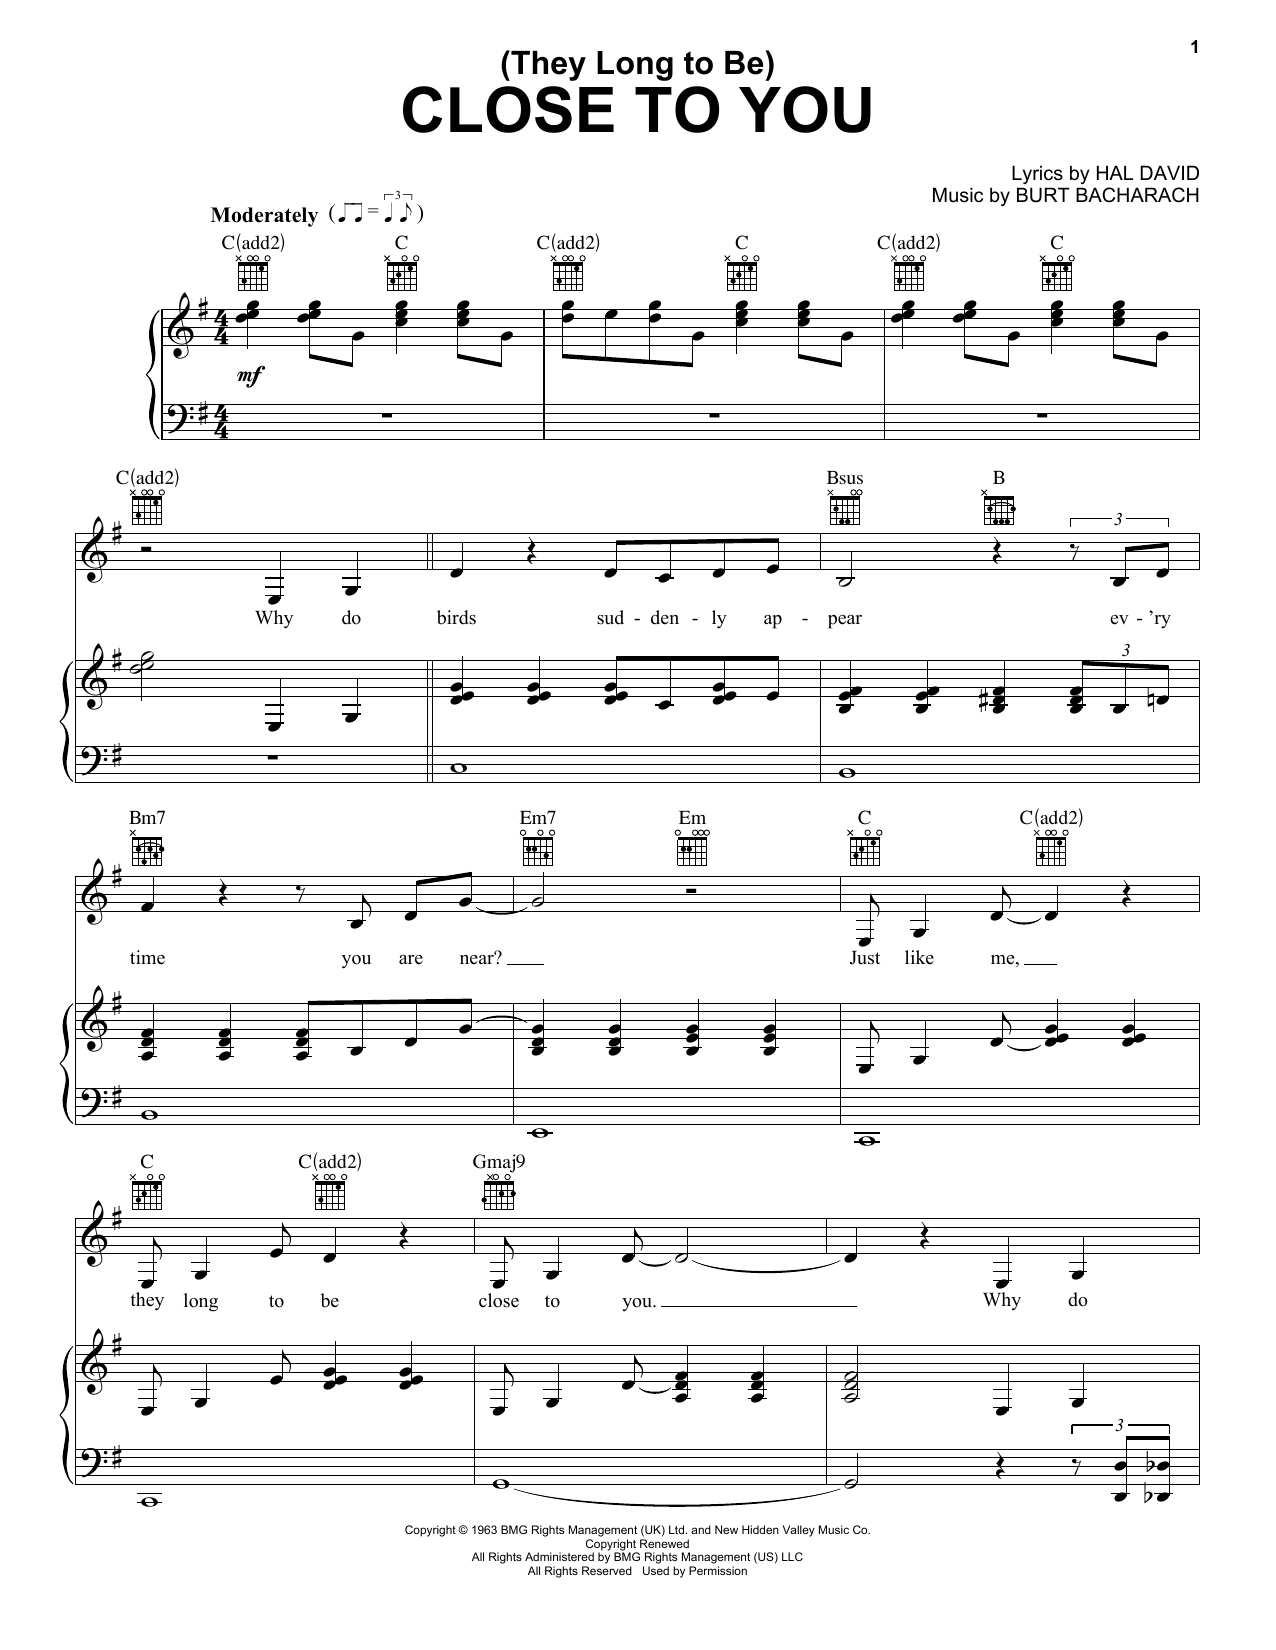 The Carpenters (They Long To Be) Close To You sheet music notes printable PDF score